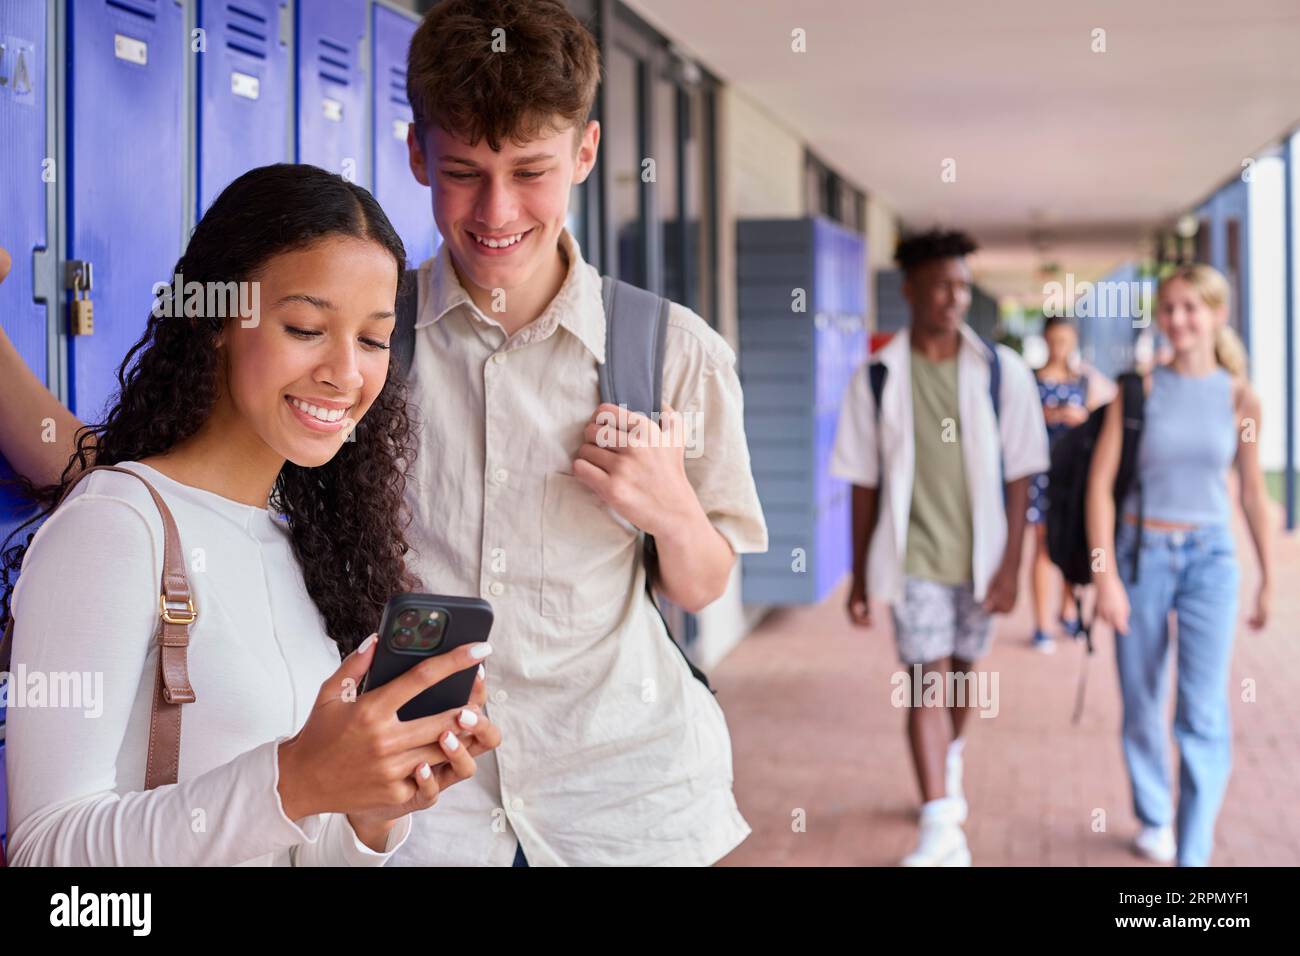 Male And Female Secondary Or High School Students Outdoors At School Looking At Mobile Phone Stock Photo